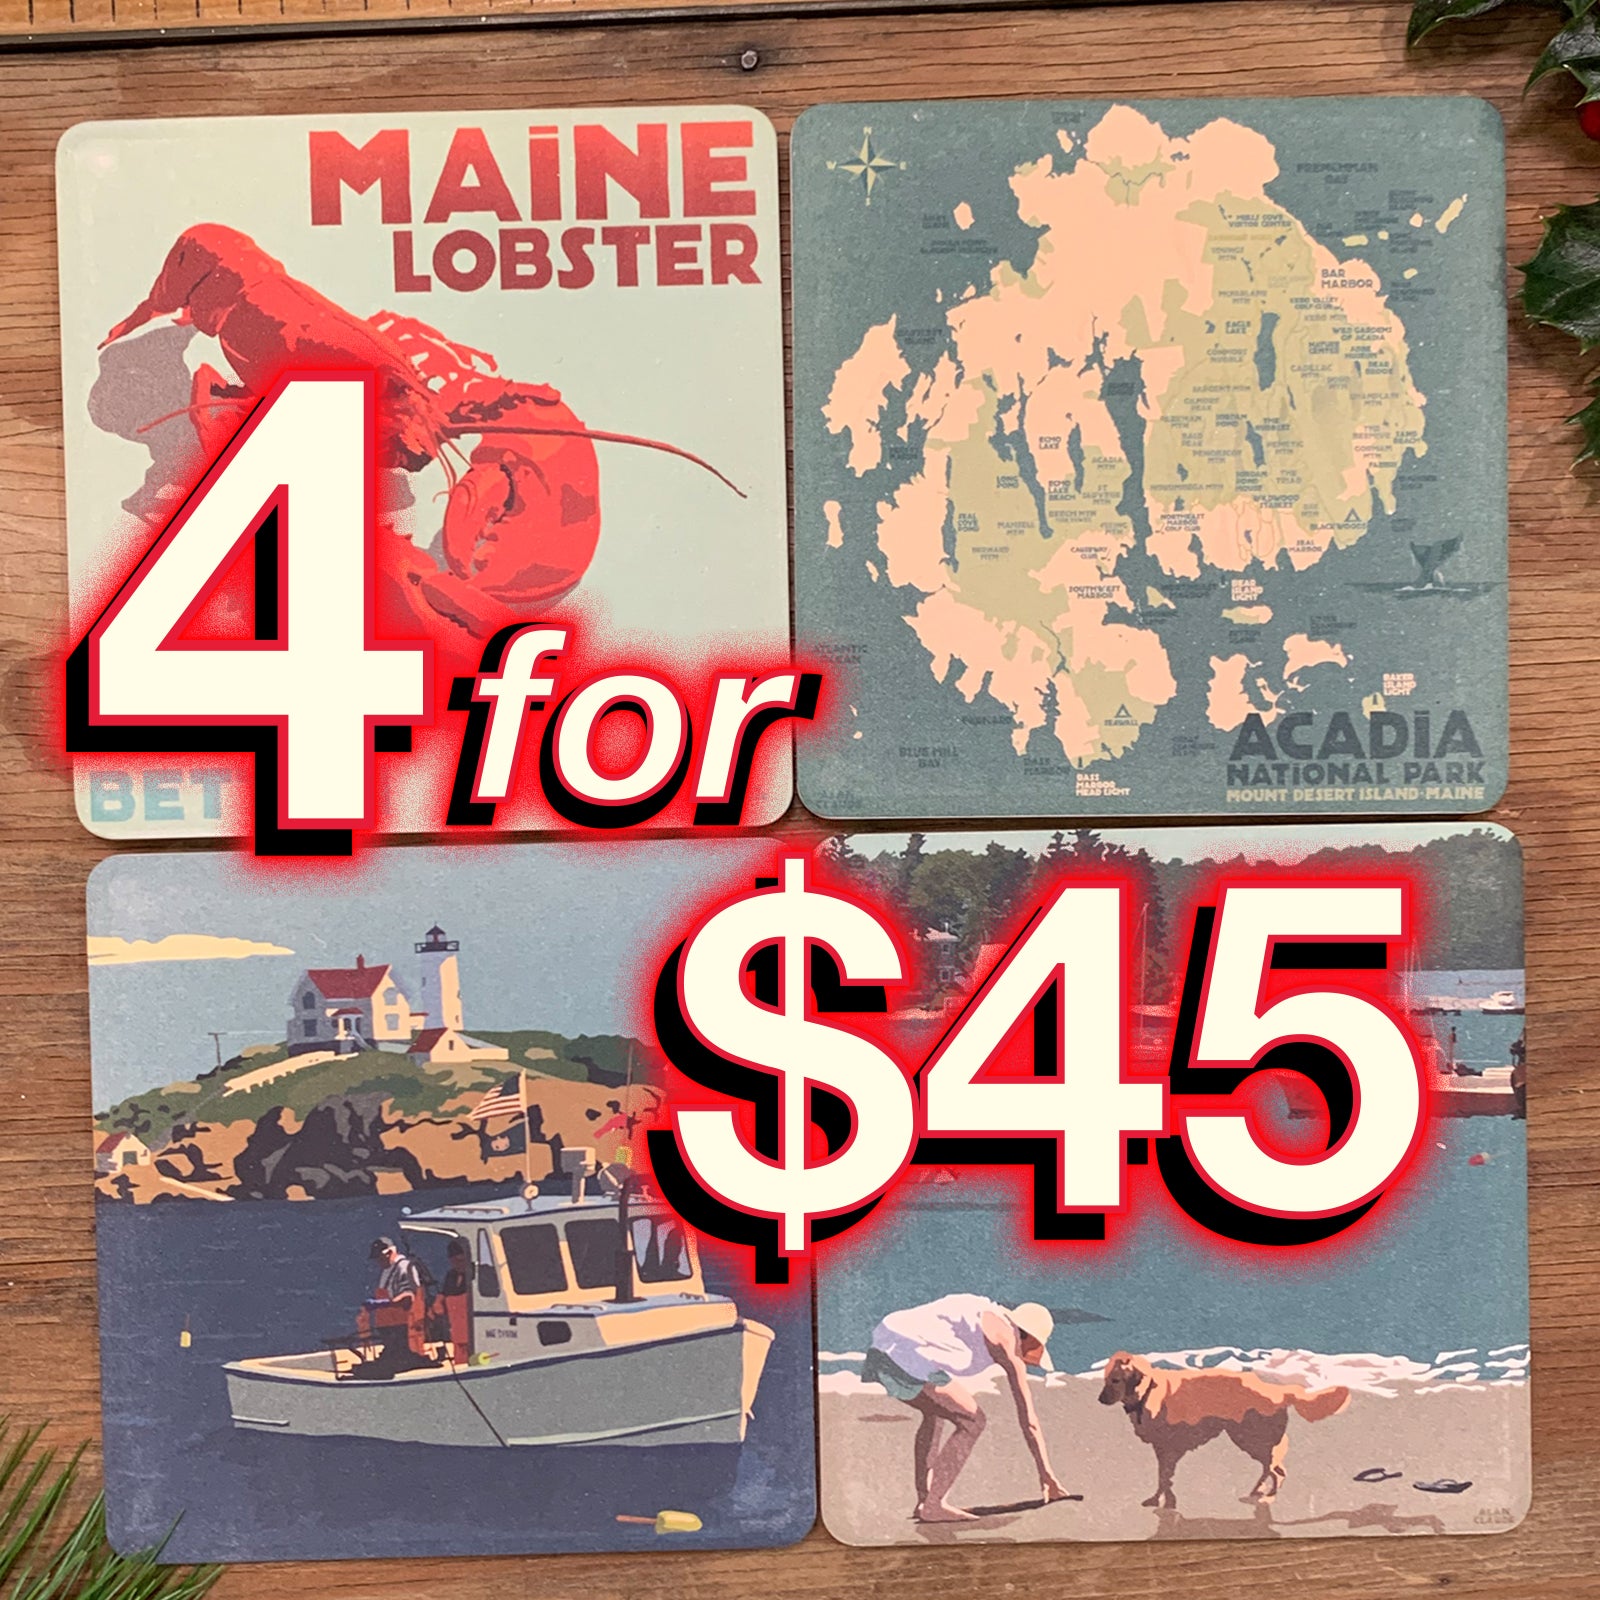 4 Coasters for $45